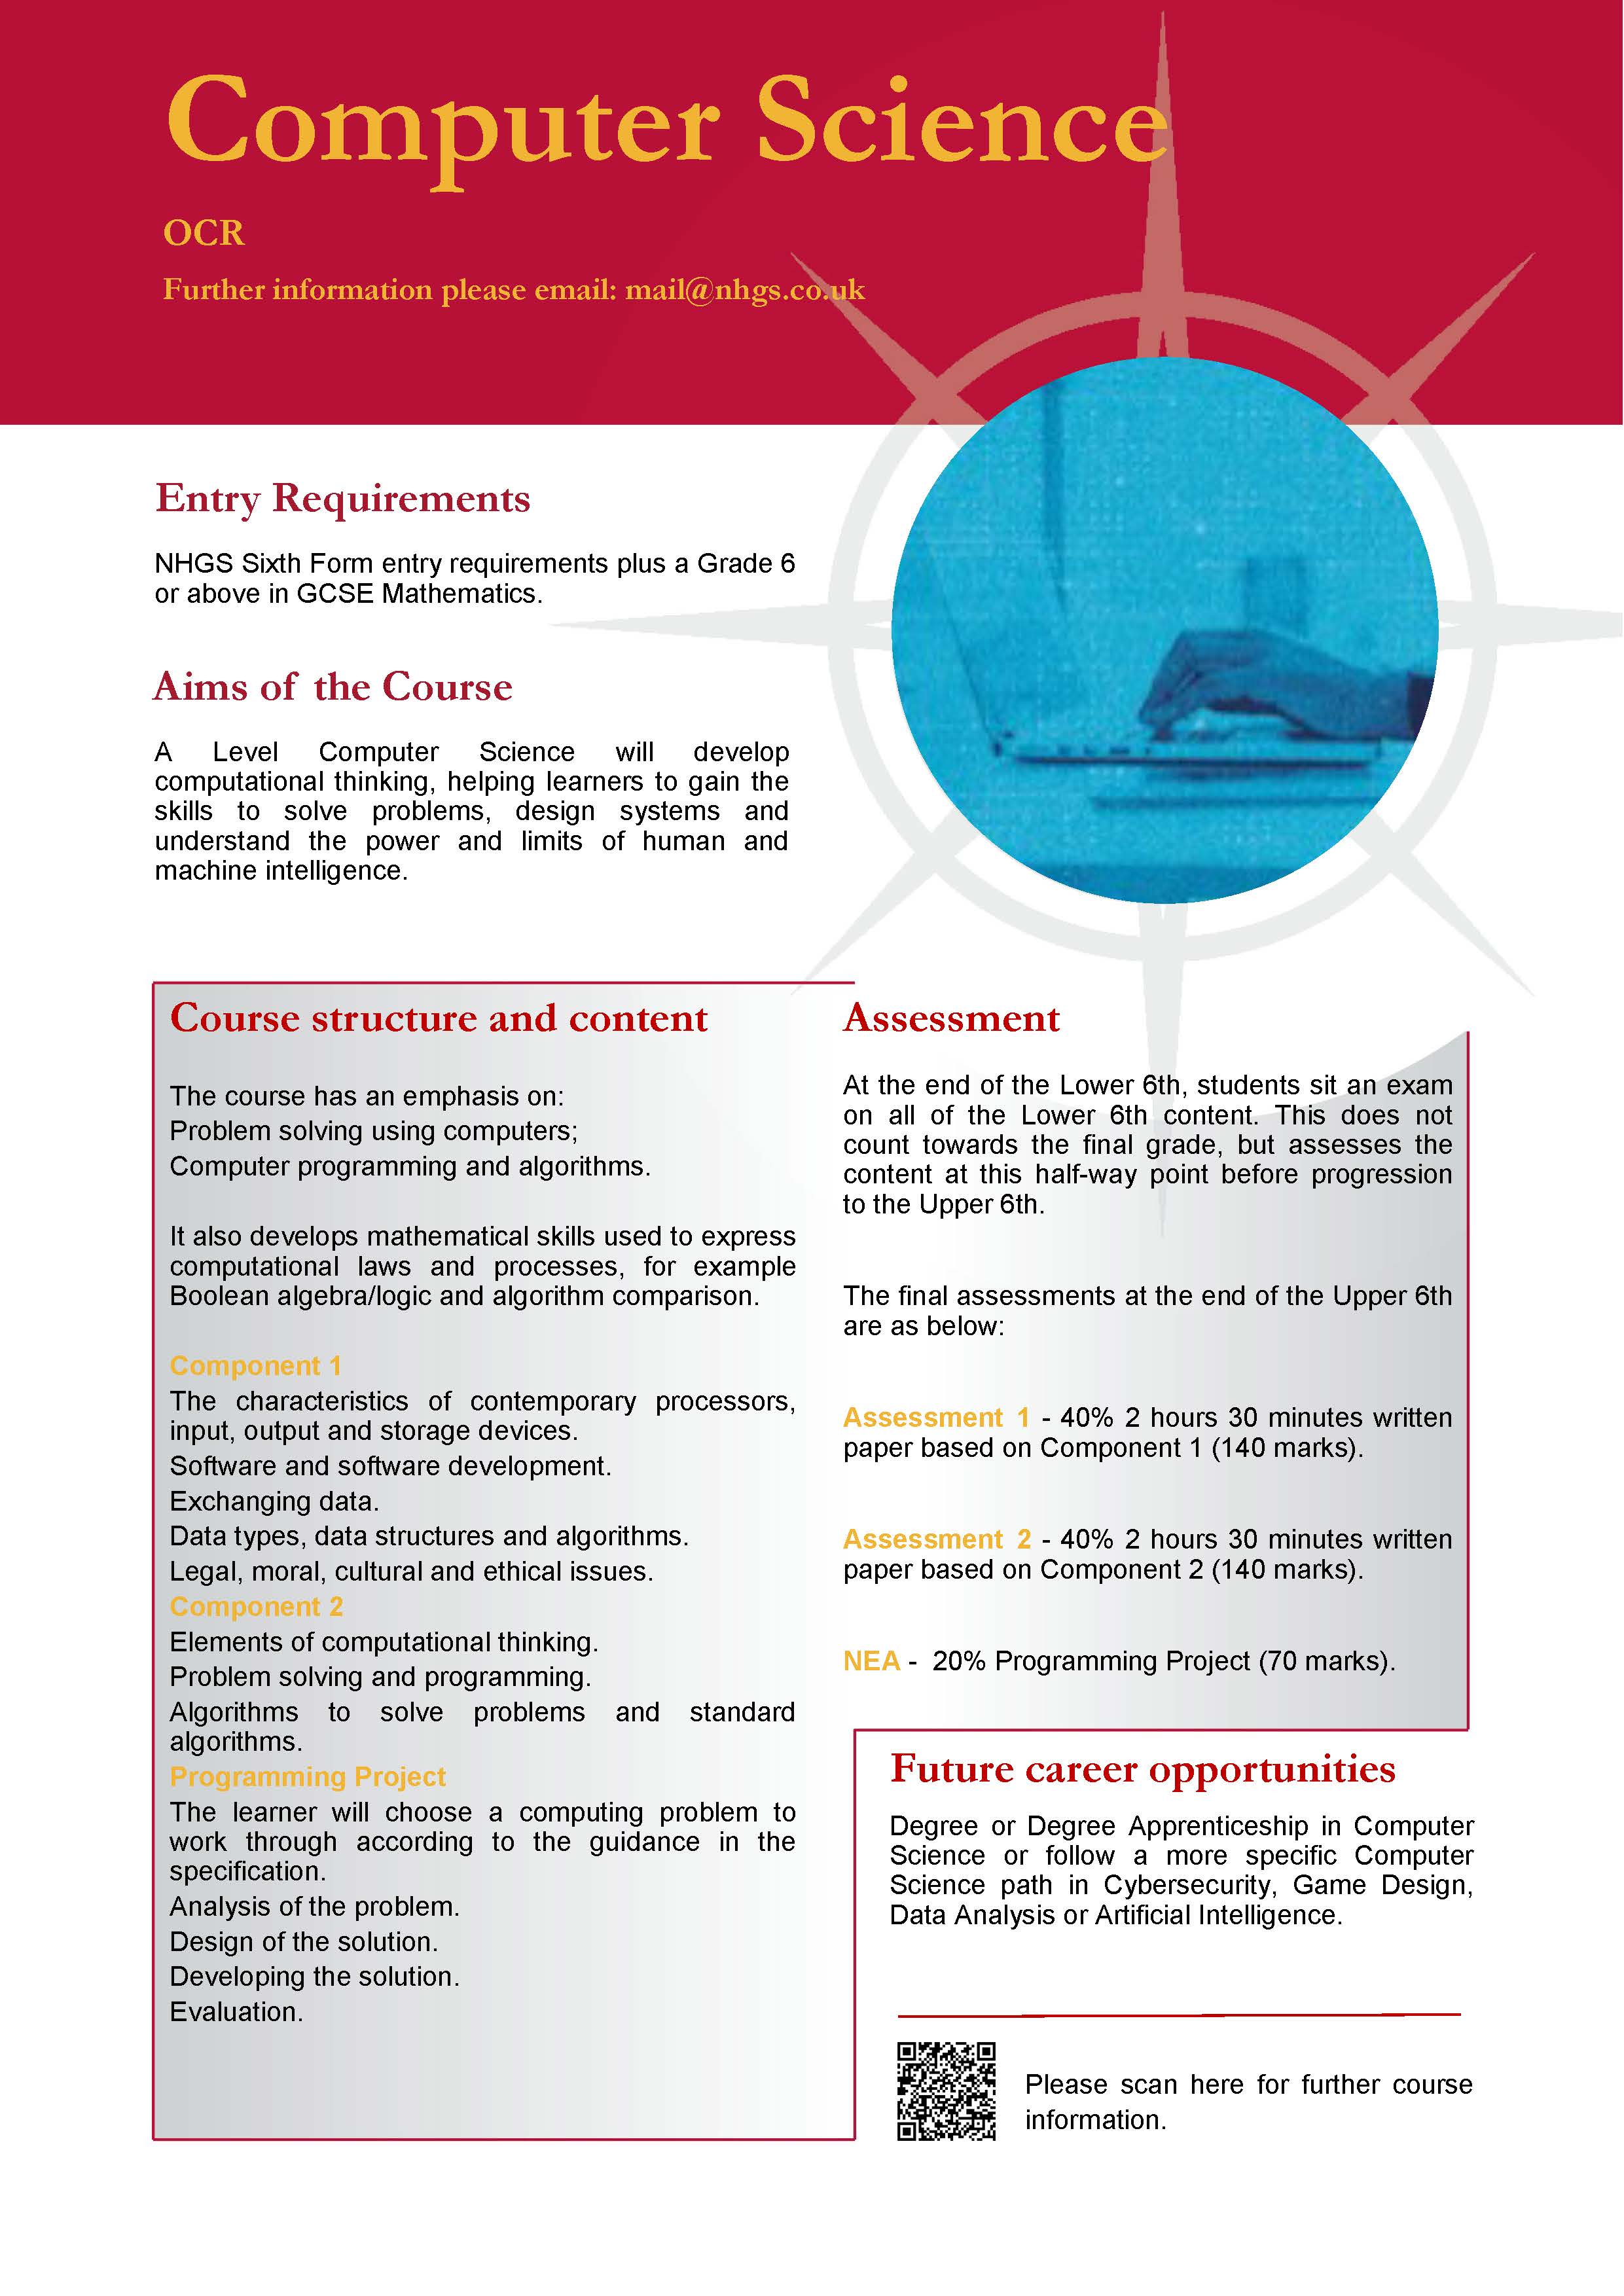 Computer Science A Level Course Flyer, NHGS Sixth Form